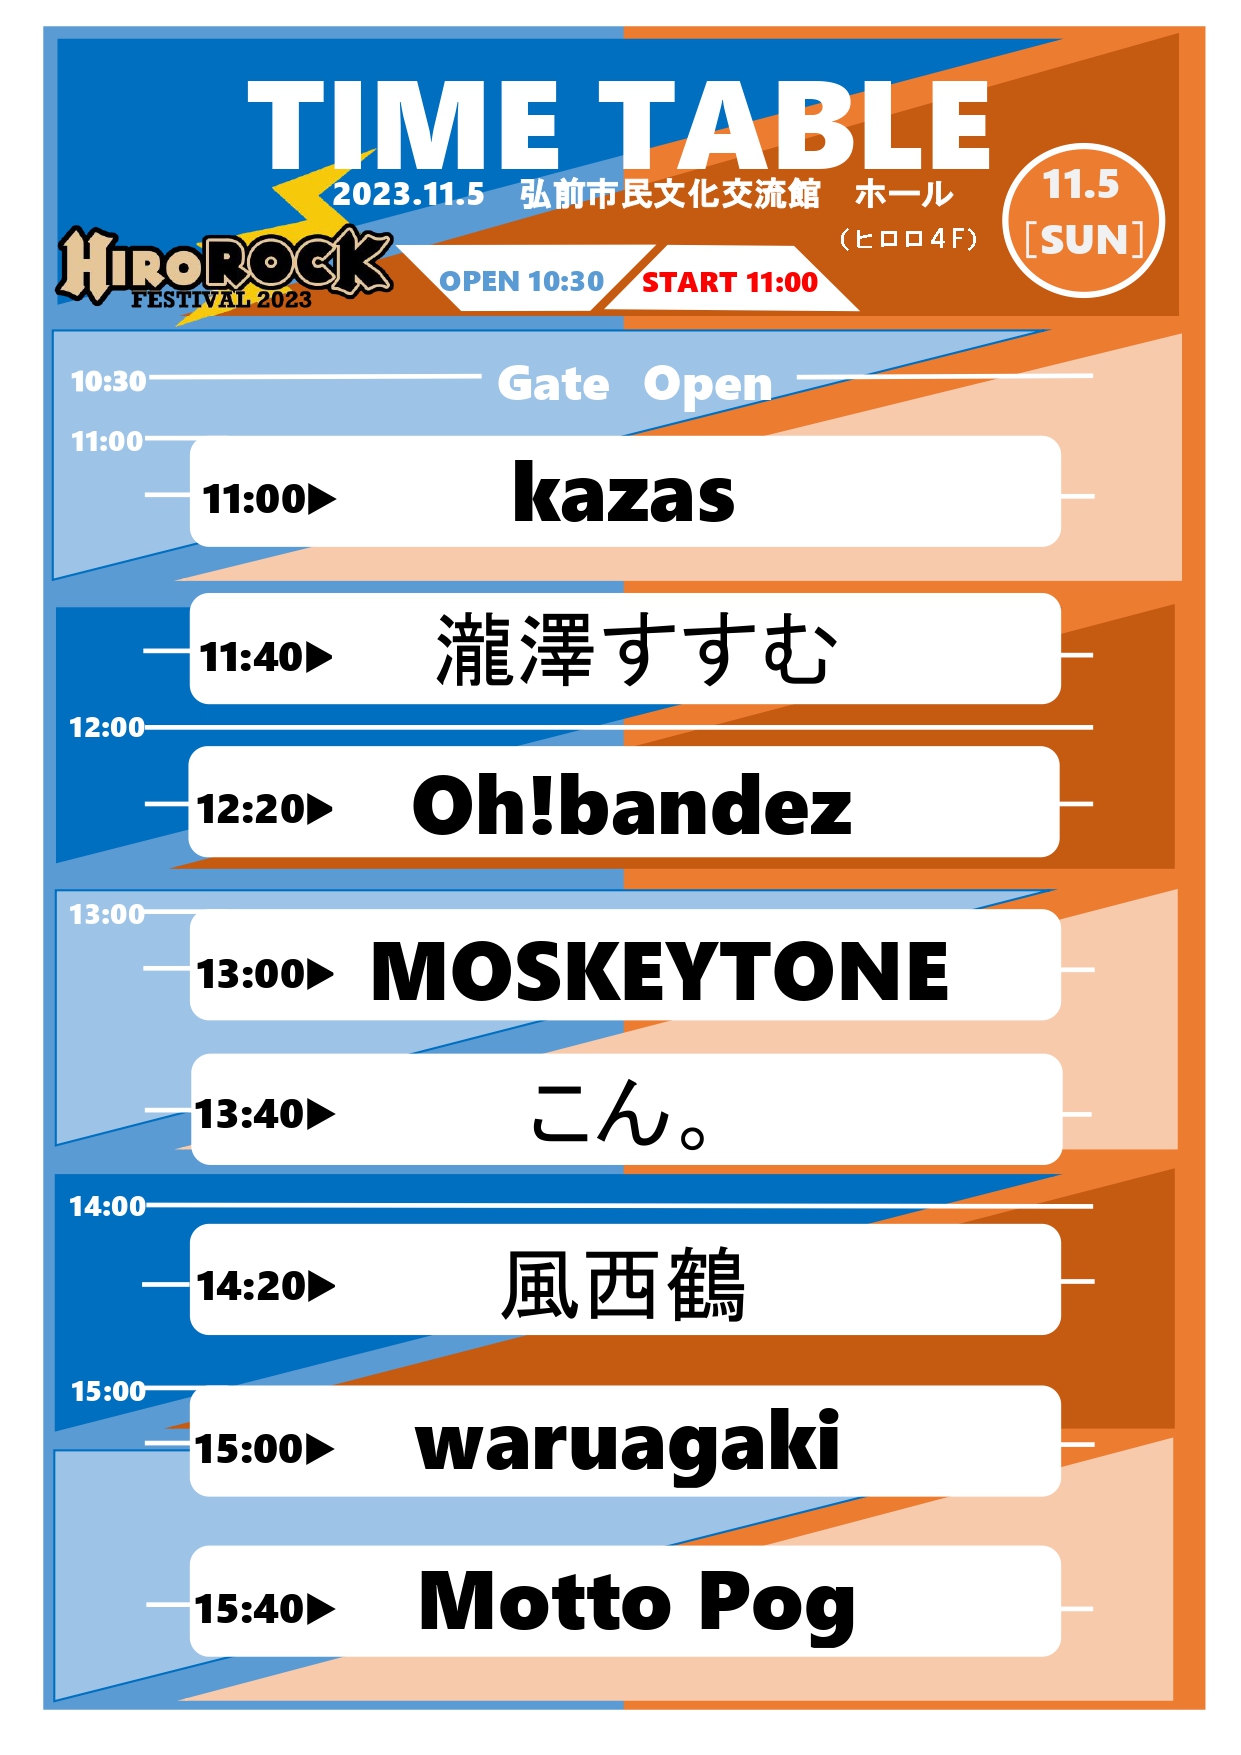 HIROROCK FESTIVAL 2023 TIME TABLE_page-0001.jpg